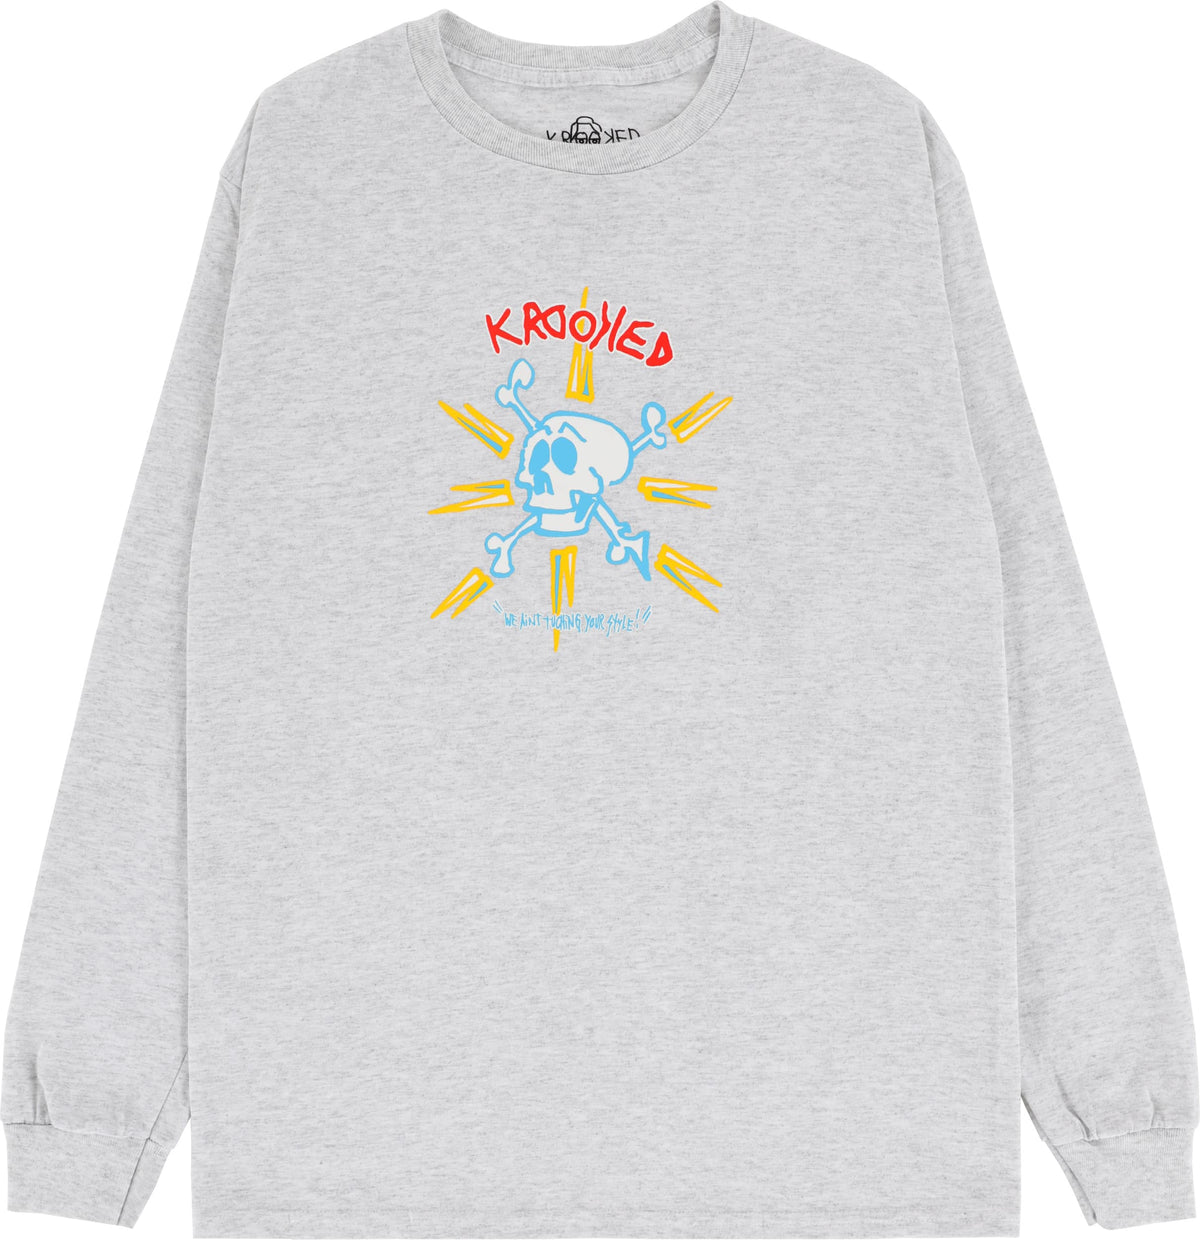 Krooked Style Long Sleeve T-Shirt (Ash) - Apple Valley Emporium